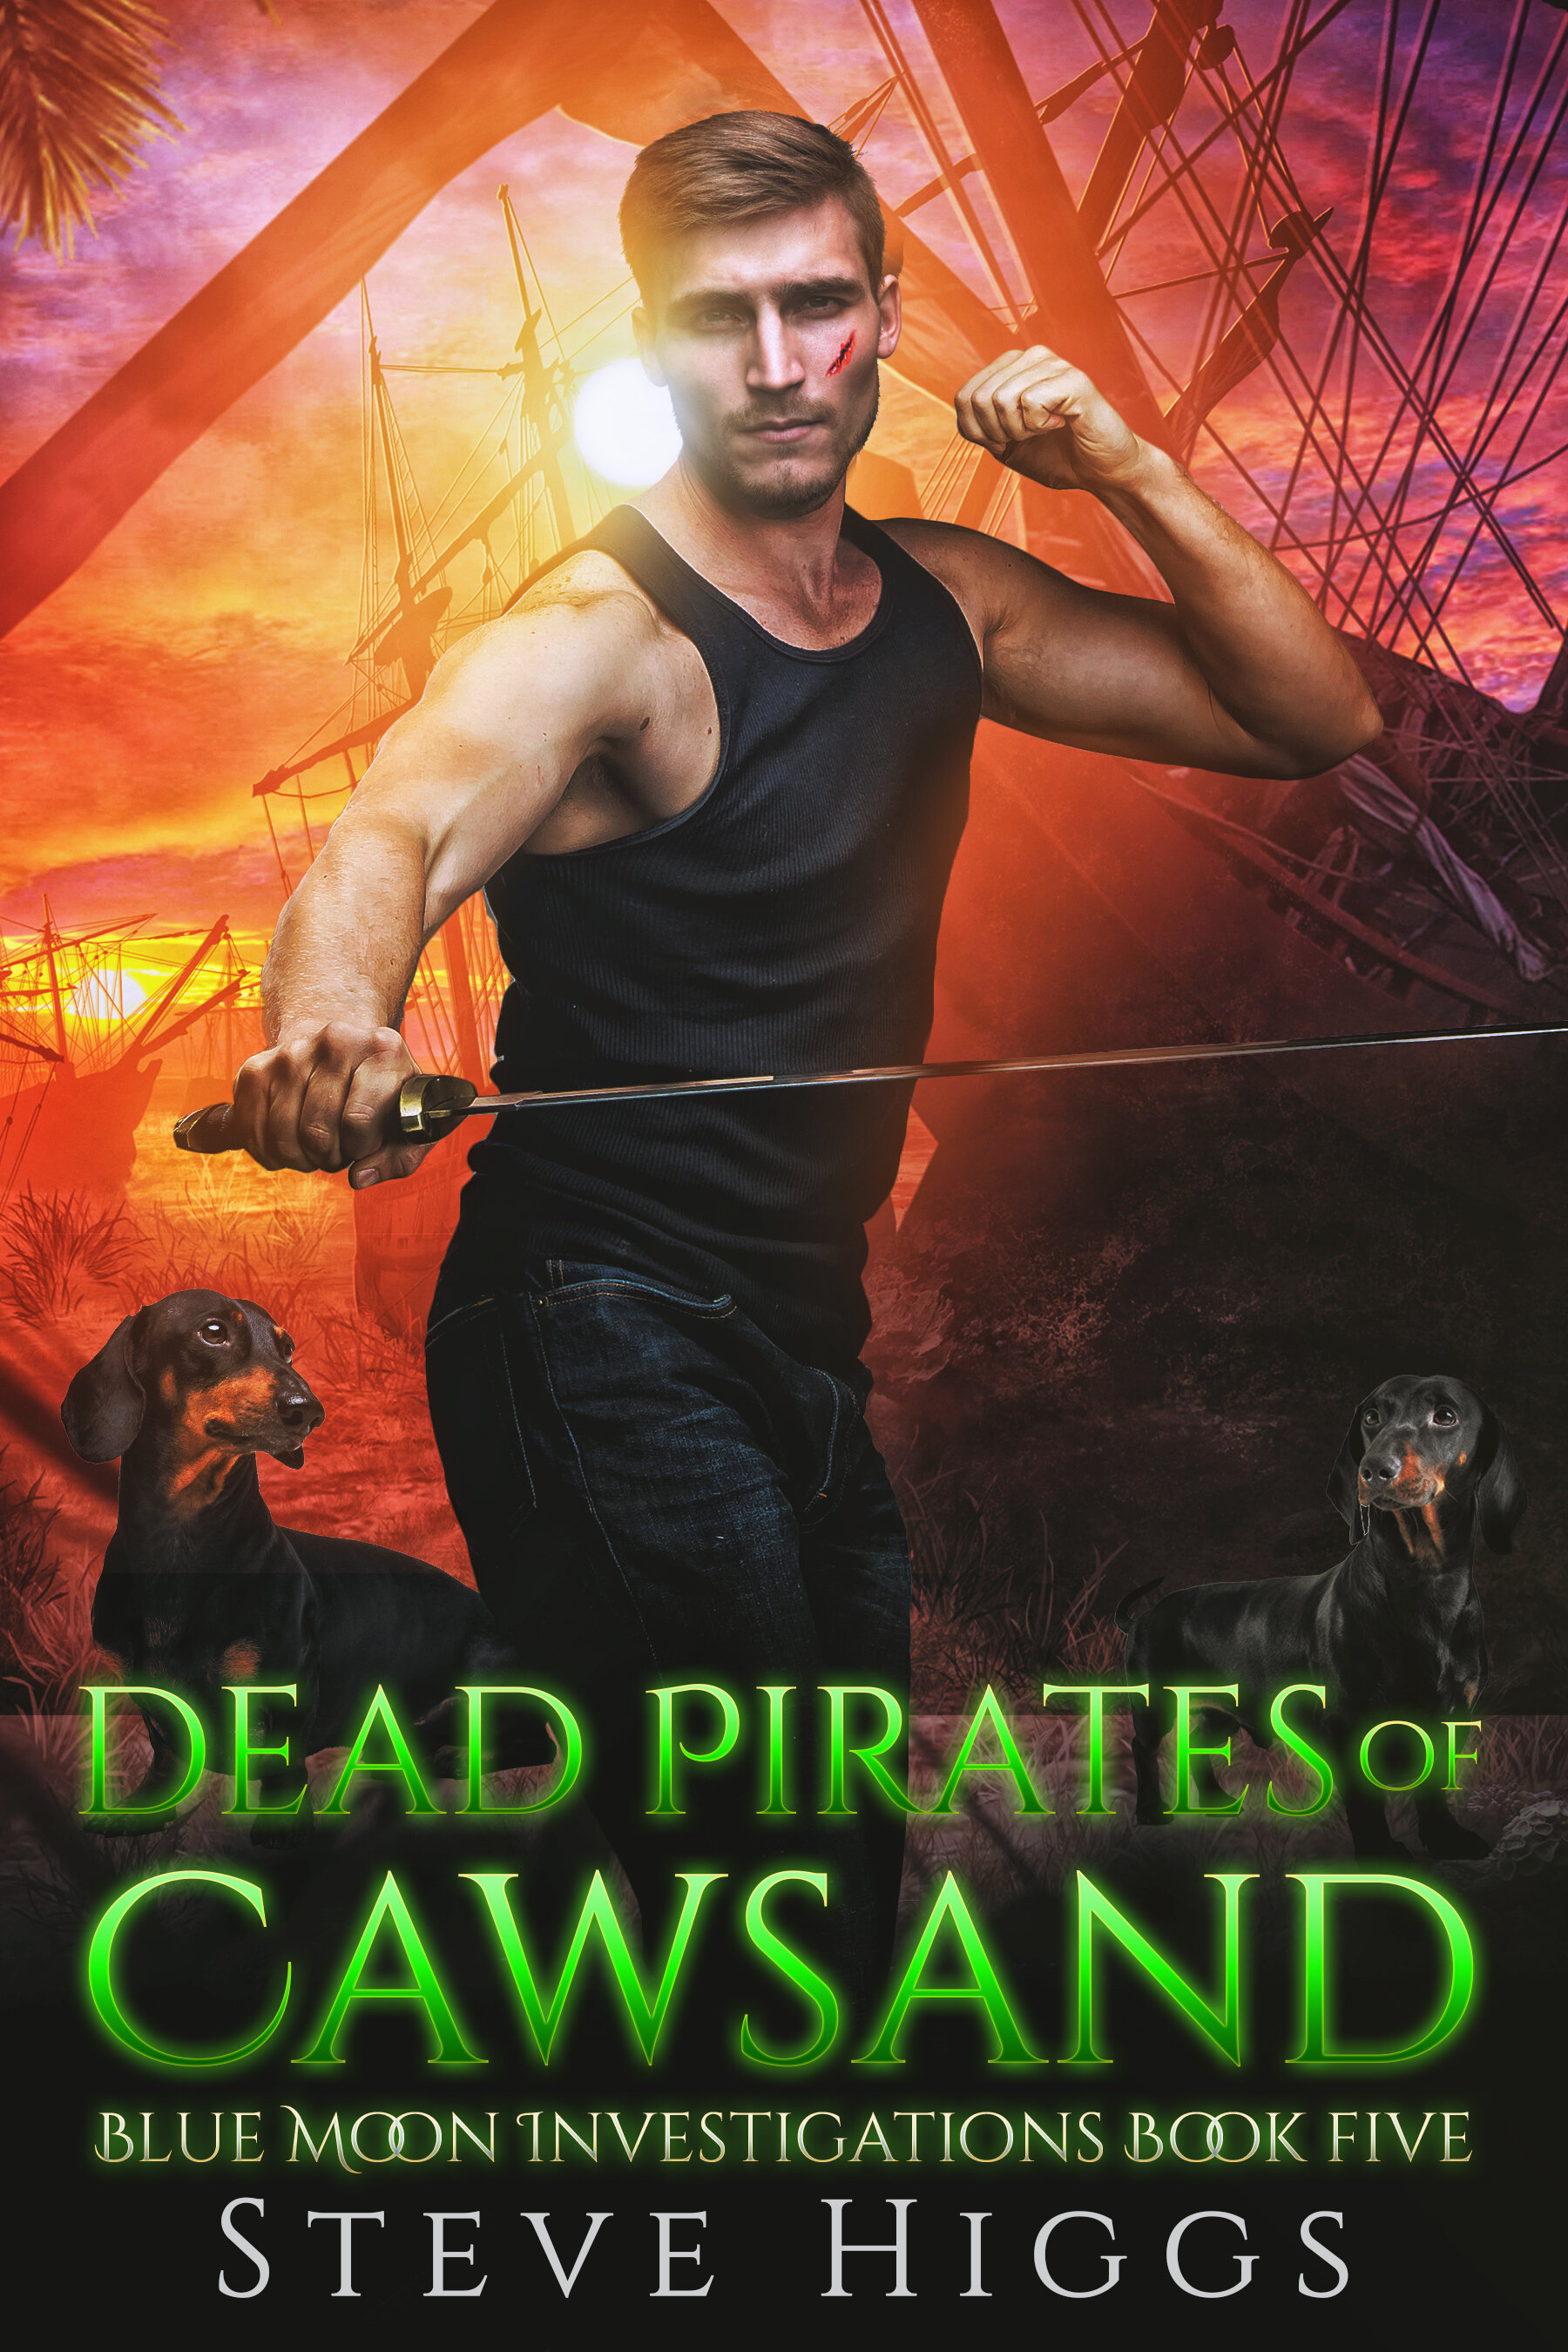 Steve Higgs - Dead Pirates of Cawsand – Blue Moon Investigations Book 5.jpg